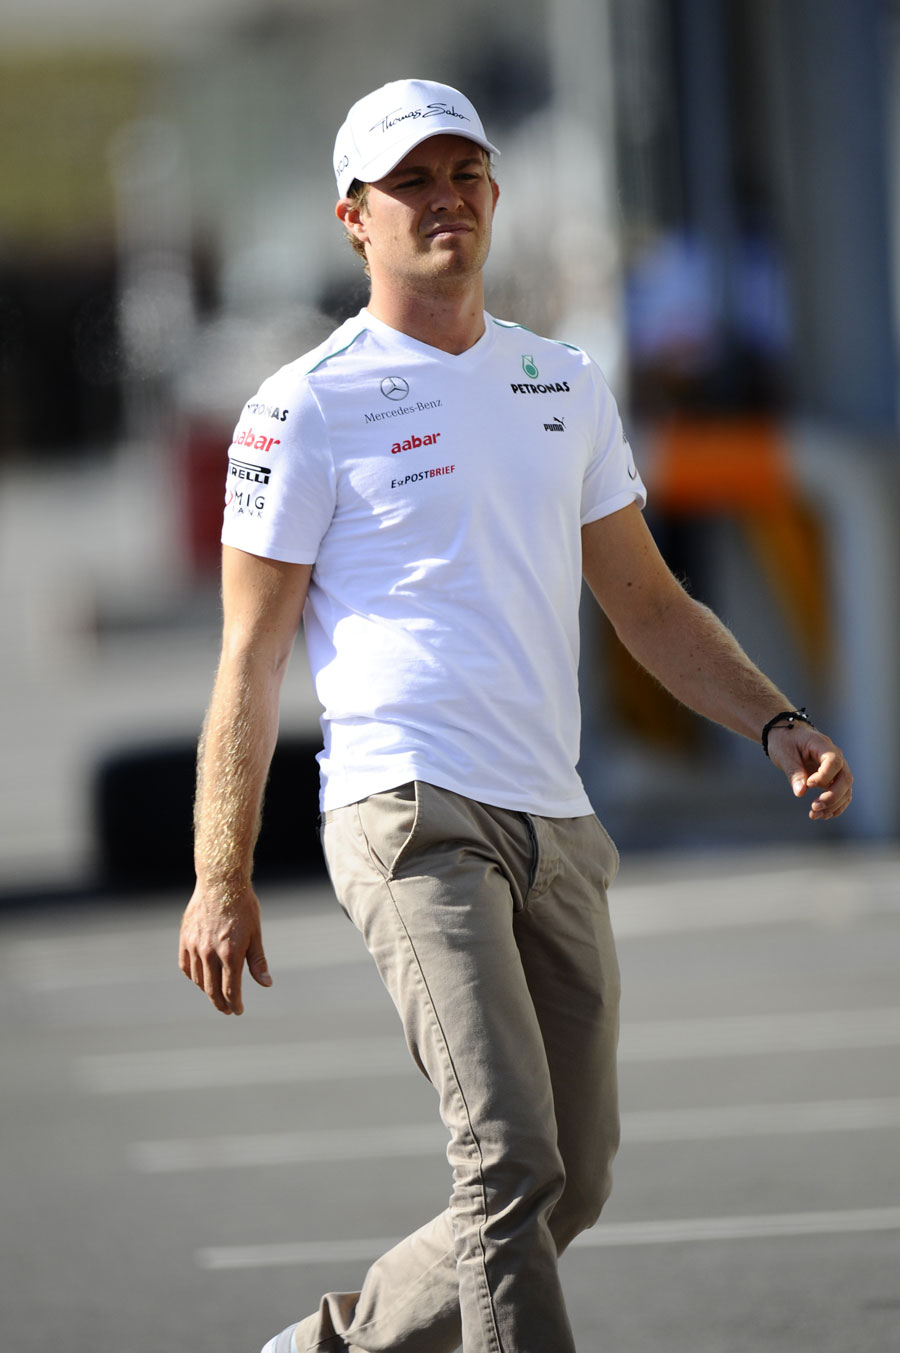 Nico Rosberg in the paddock on Thursday